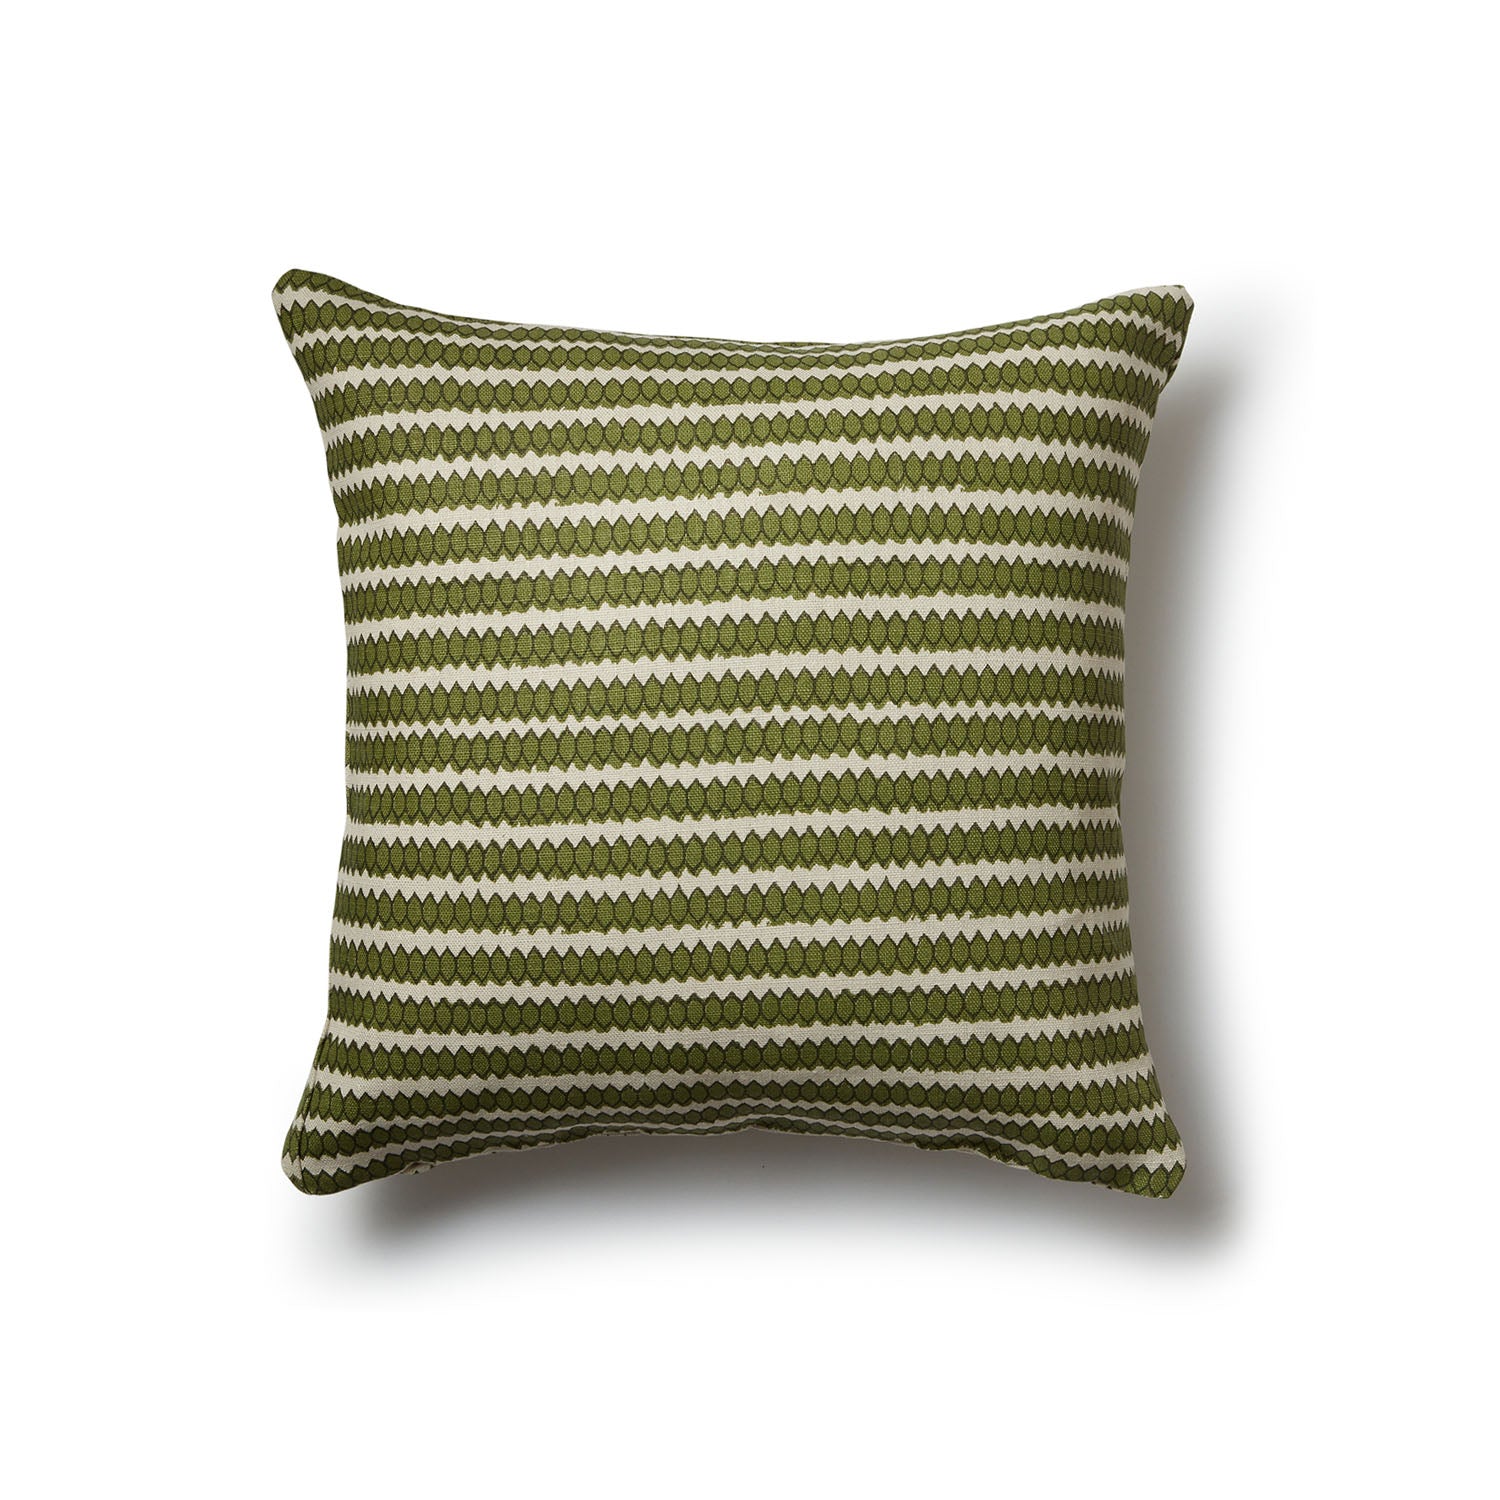 Square throw pillow in a striped pattern of hand-drawn olive and brown honeycomb shapes on a cream background.